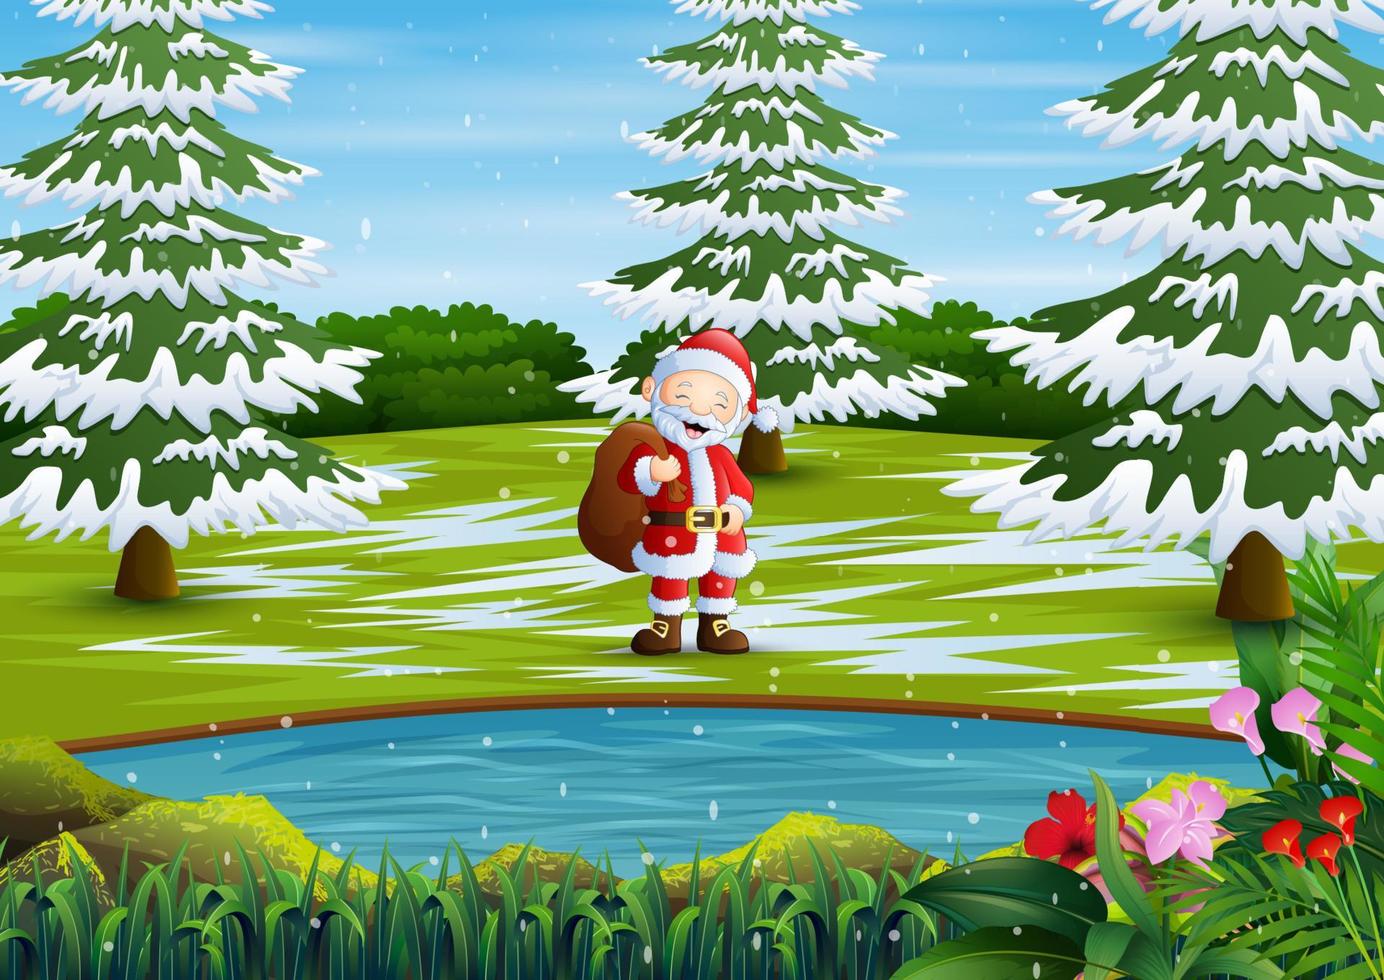 Santa claus standing with sack of presents in forest vector